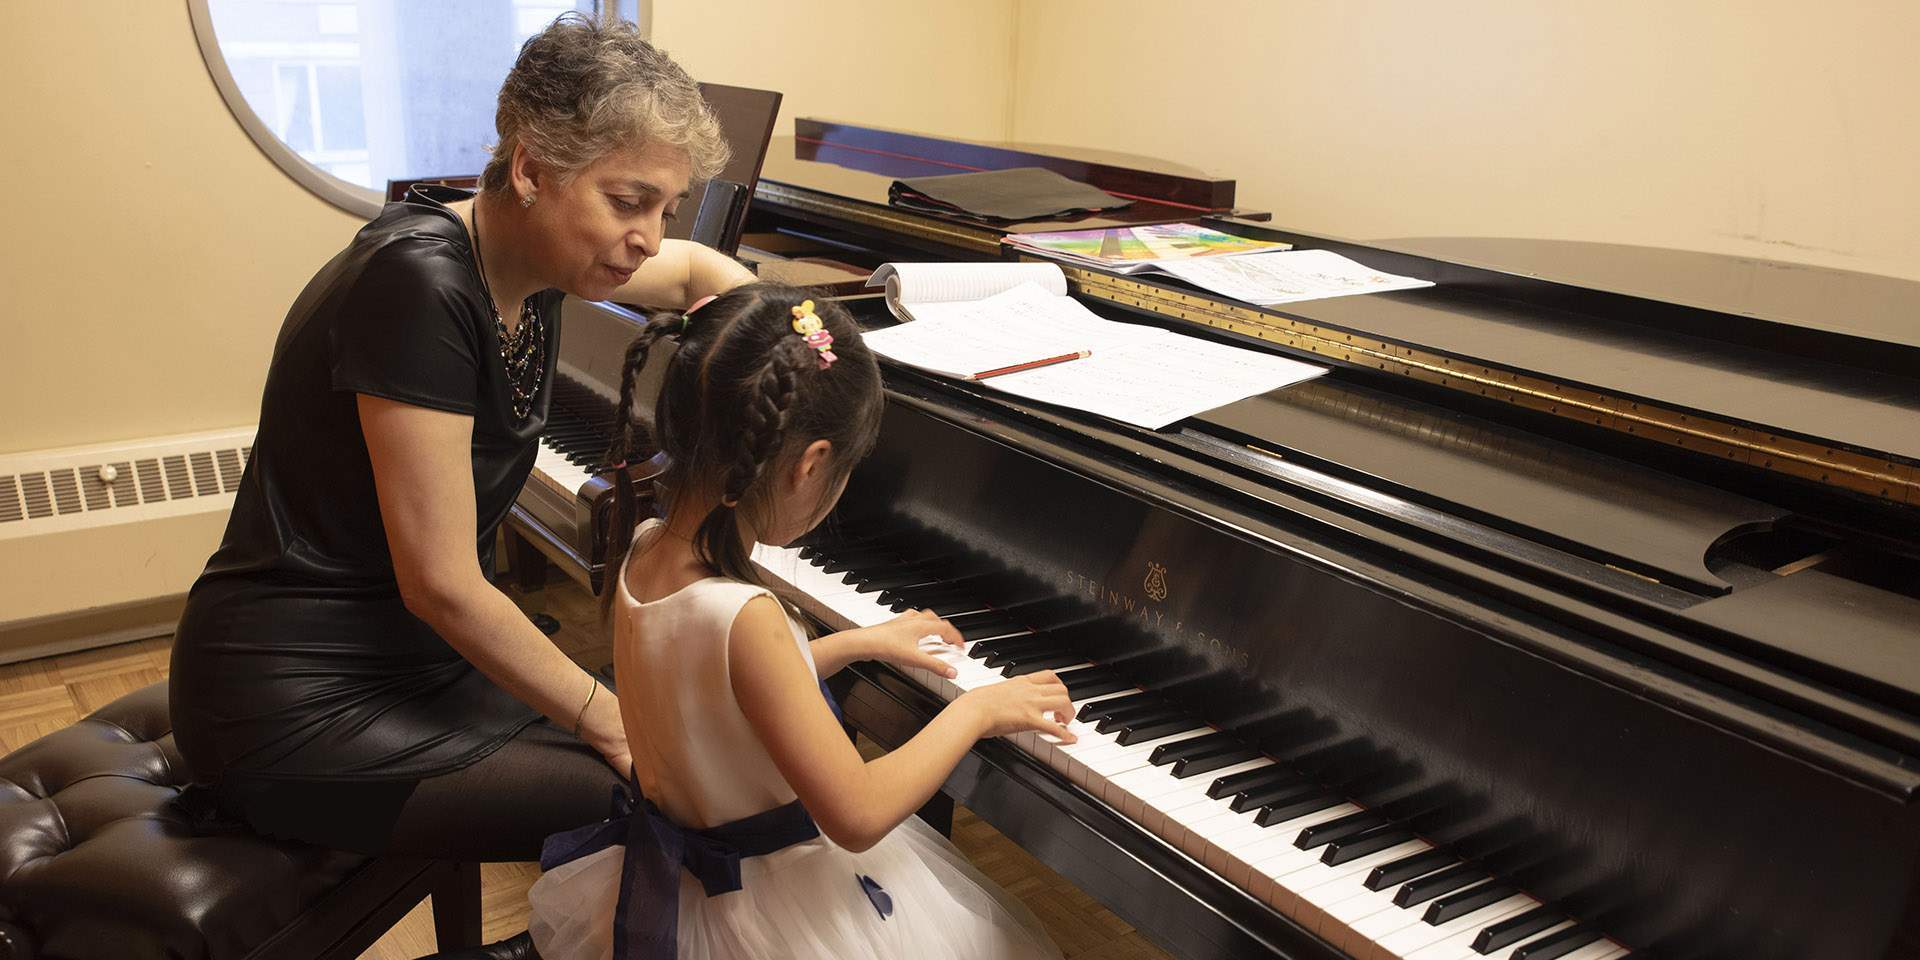 NYC Private Music Lessons - Piano, Wind, String, And Moreâ€¦